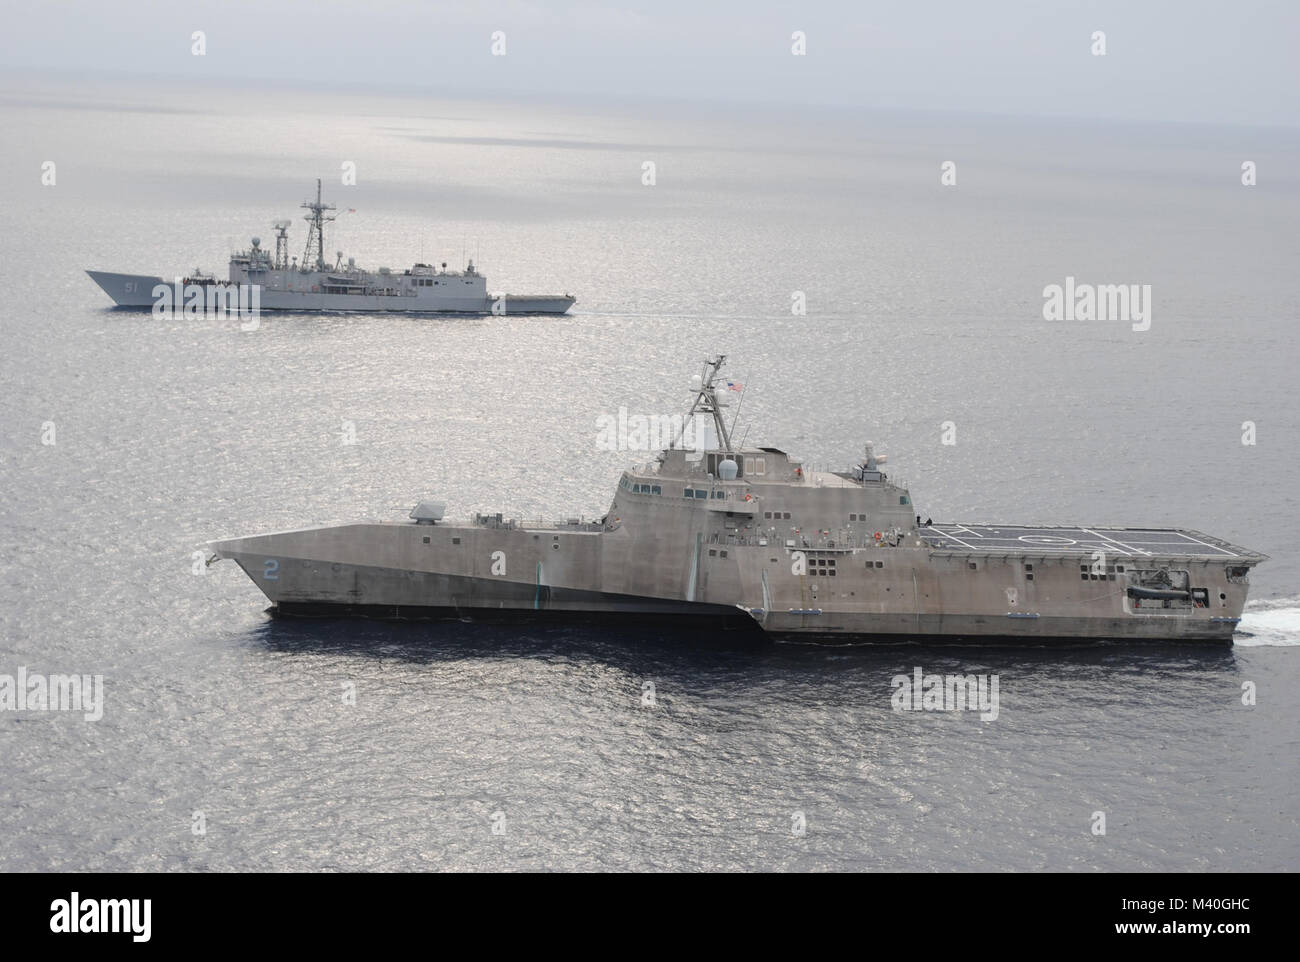 EASTERN PACIFIC (Jan. 06, 2015) - USS Gary (FFG 51) and USS Independence (LCS 2) conduct a photo exercise off the coast of Central America. USS Gary is currently underway in support of Operation Martillo, a joint operation with the U.S. Coast Guard and partner nations within the 4th Fleet area of responsibility. (U.S. Navy photo courtesy of Aircrewman Tactical Helicopter 2nd Class Taylor Petre/Released) 150106-N-WI904-006 by U.S. Naval Forces Southern Command  U.S. 4th Fleet Stock Photo